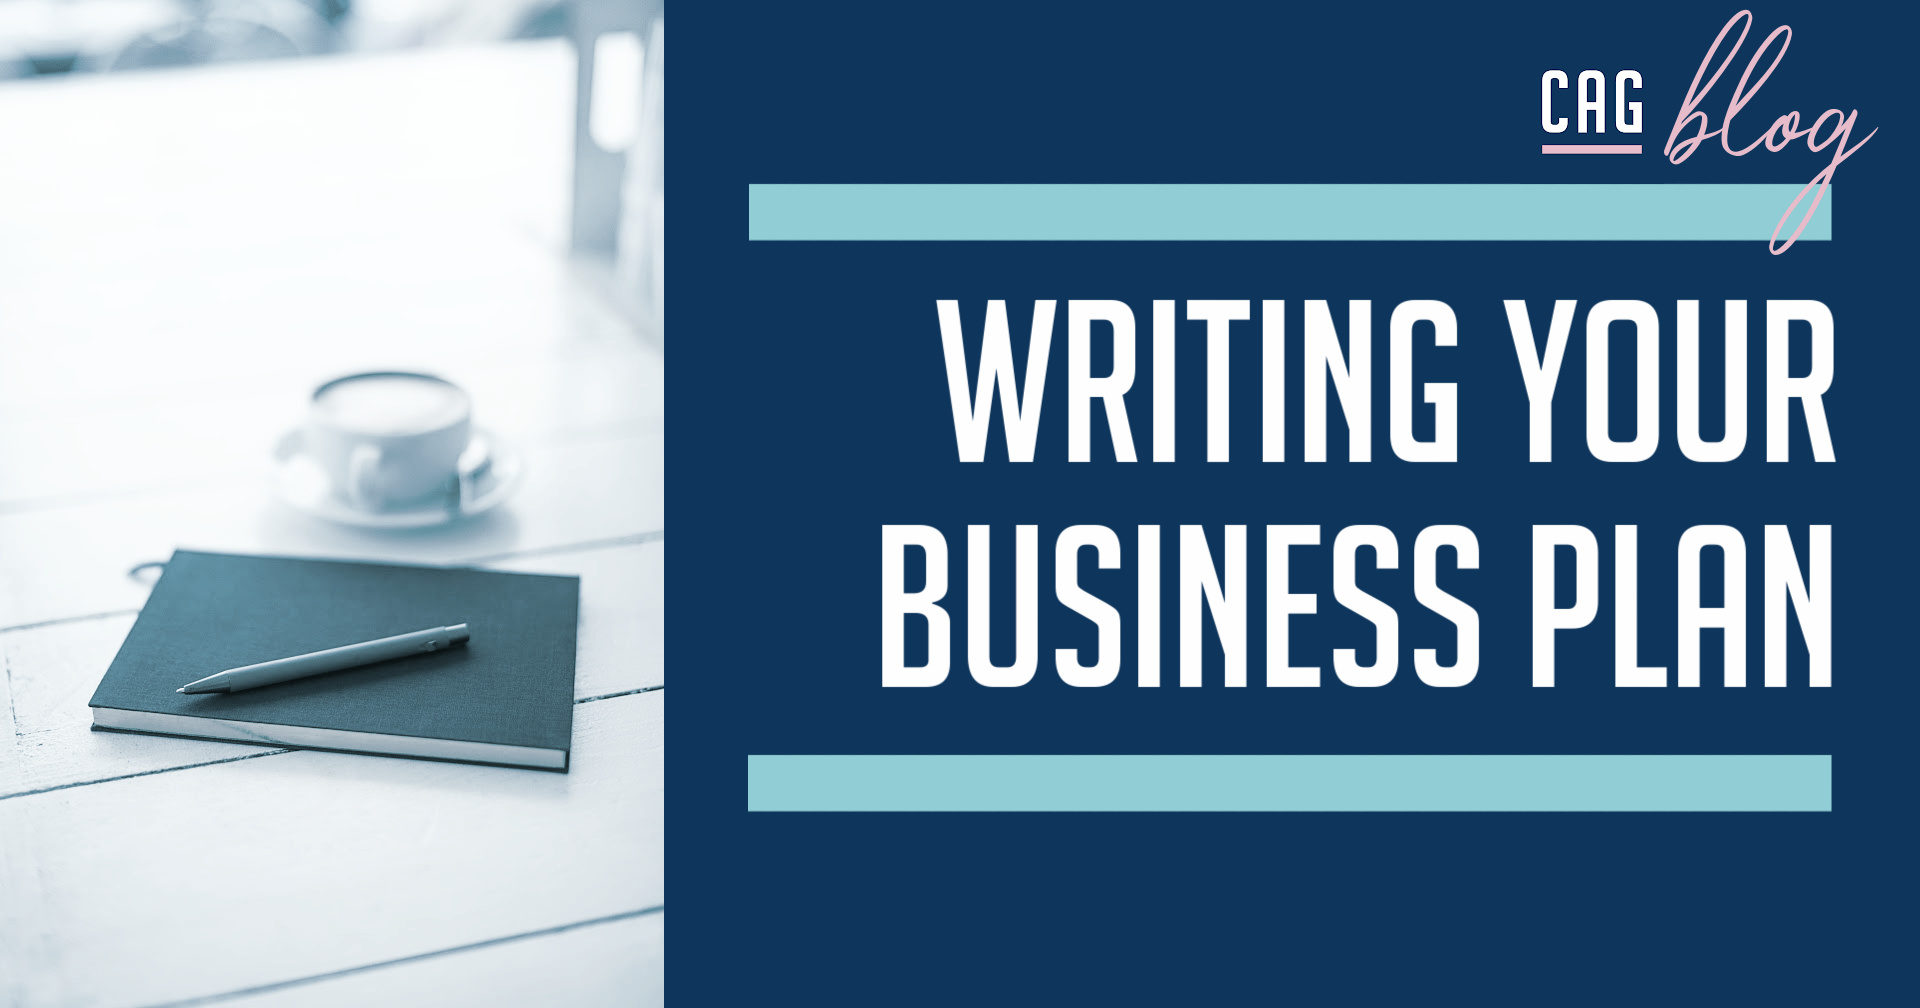 Writing your business plan by CAG Strategies